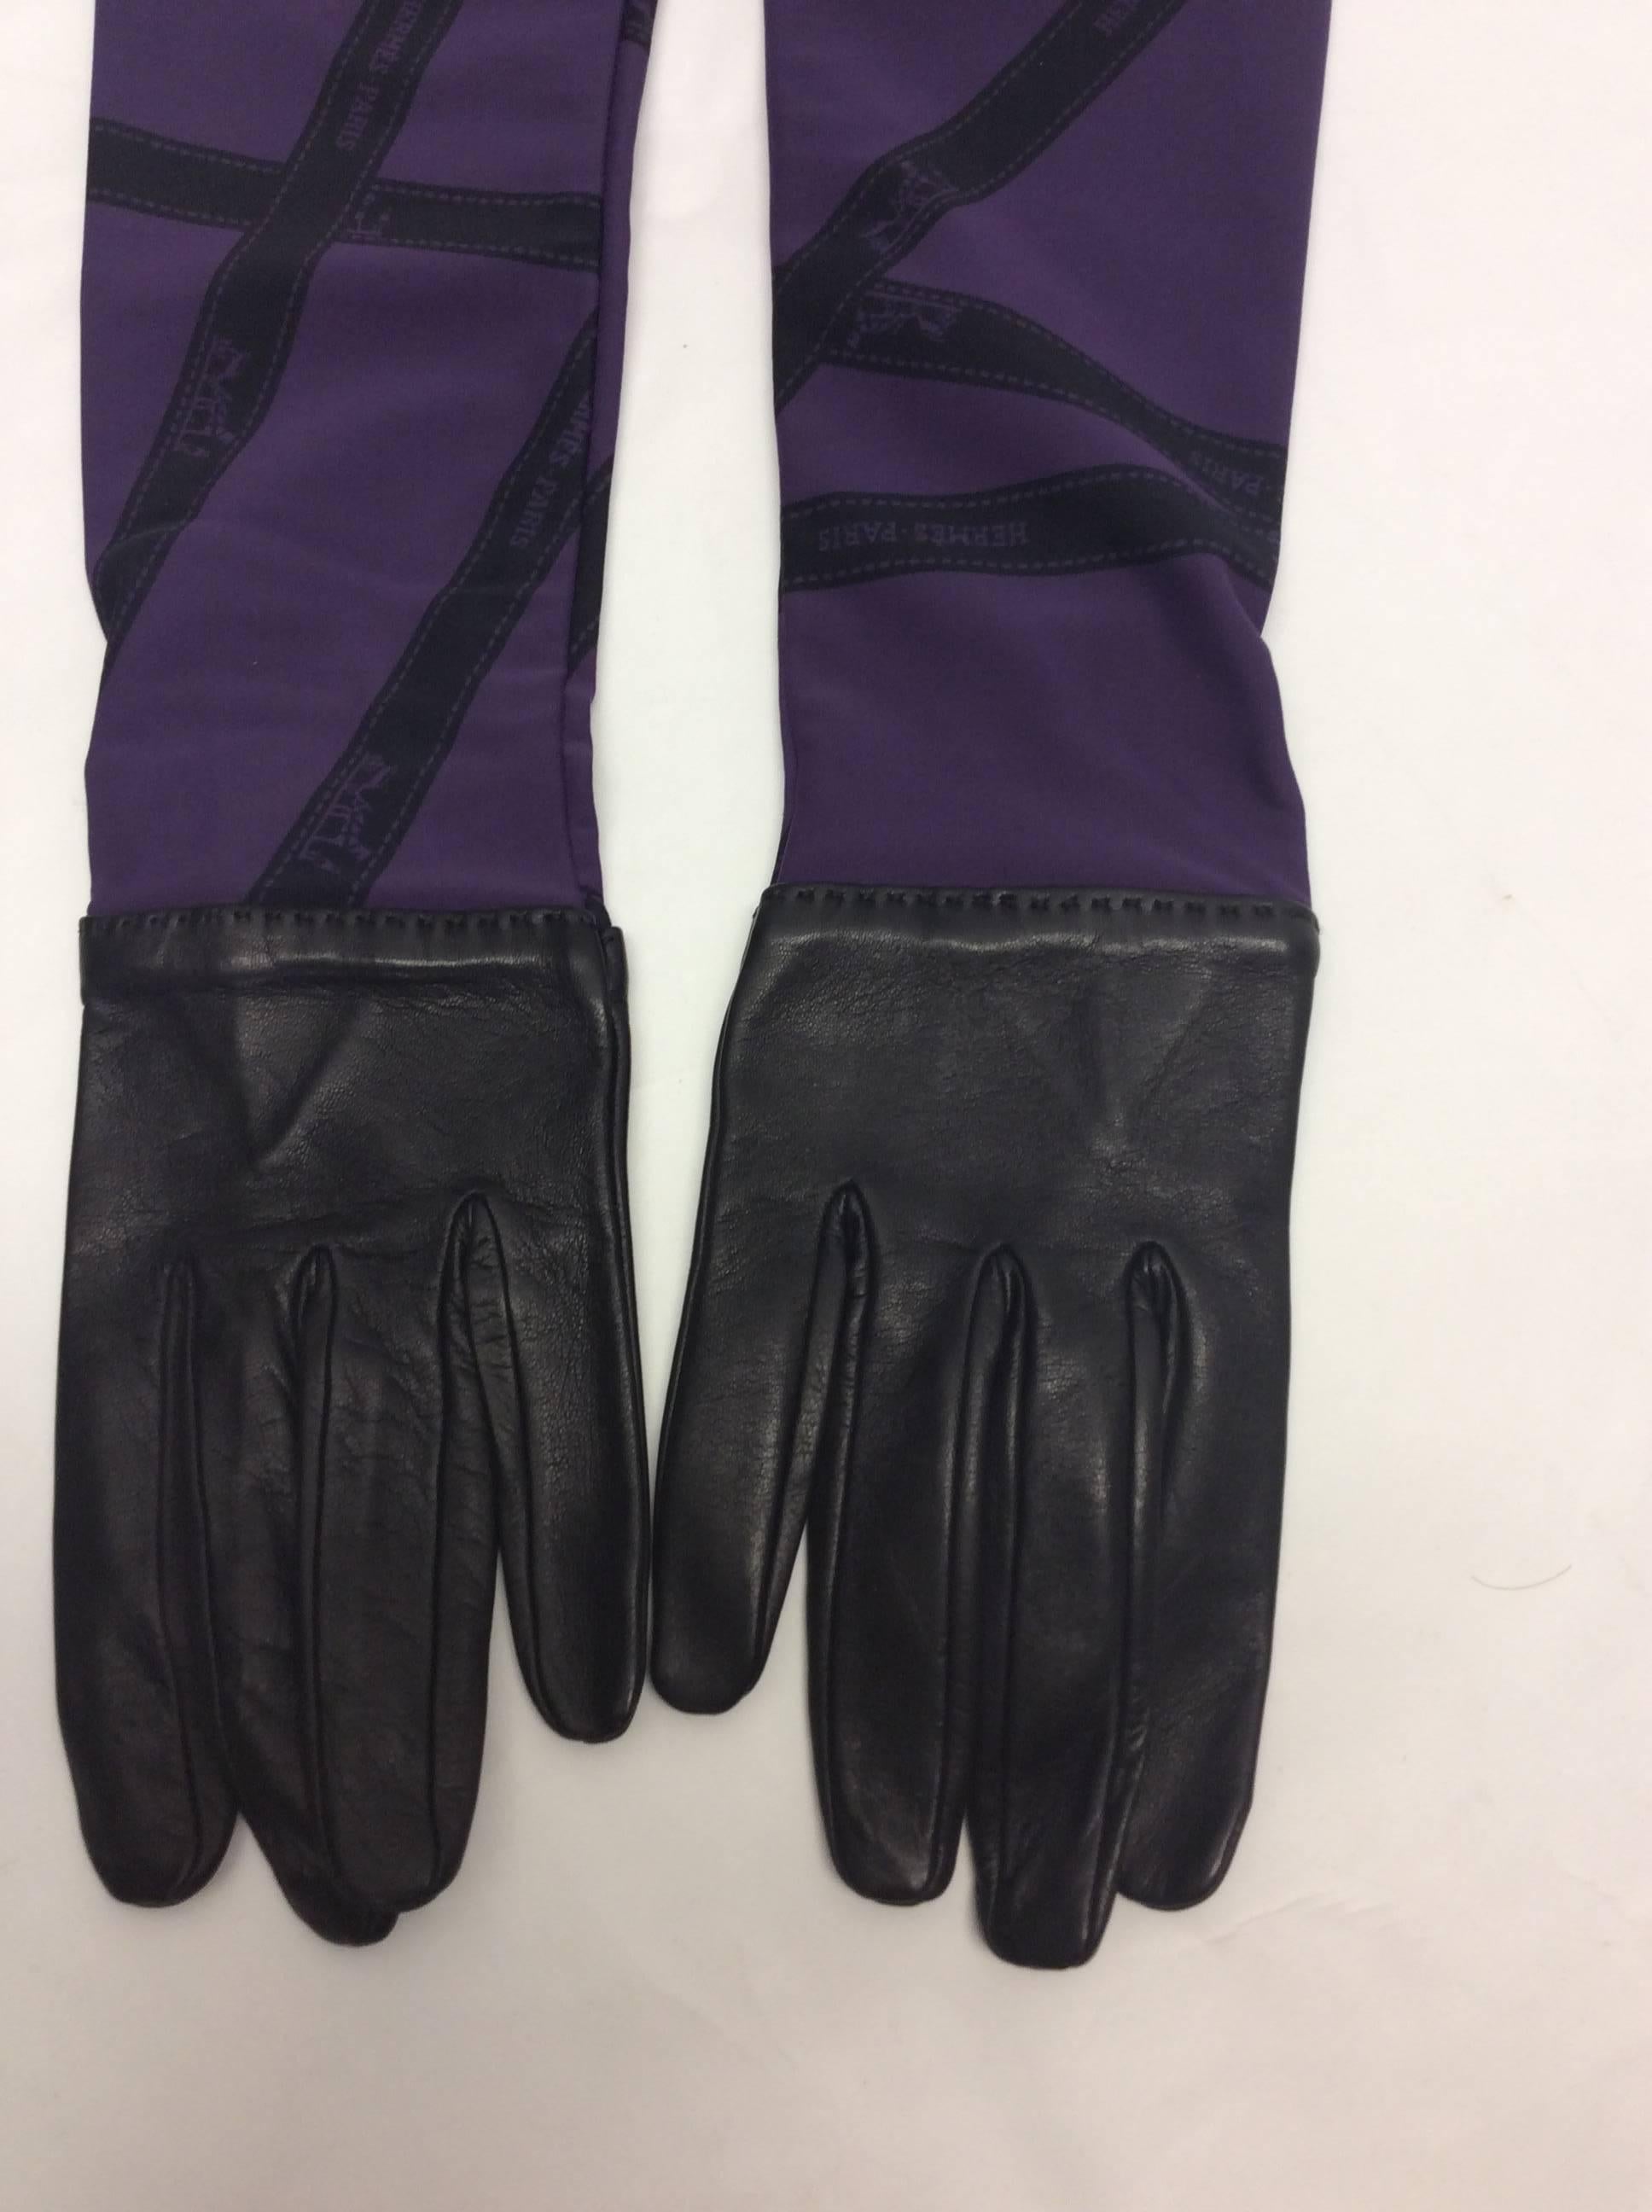 Hermes Leather And Silk Printed Gloves In Excellent Condition For Sale In Narberth, PA